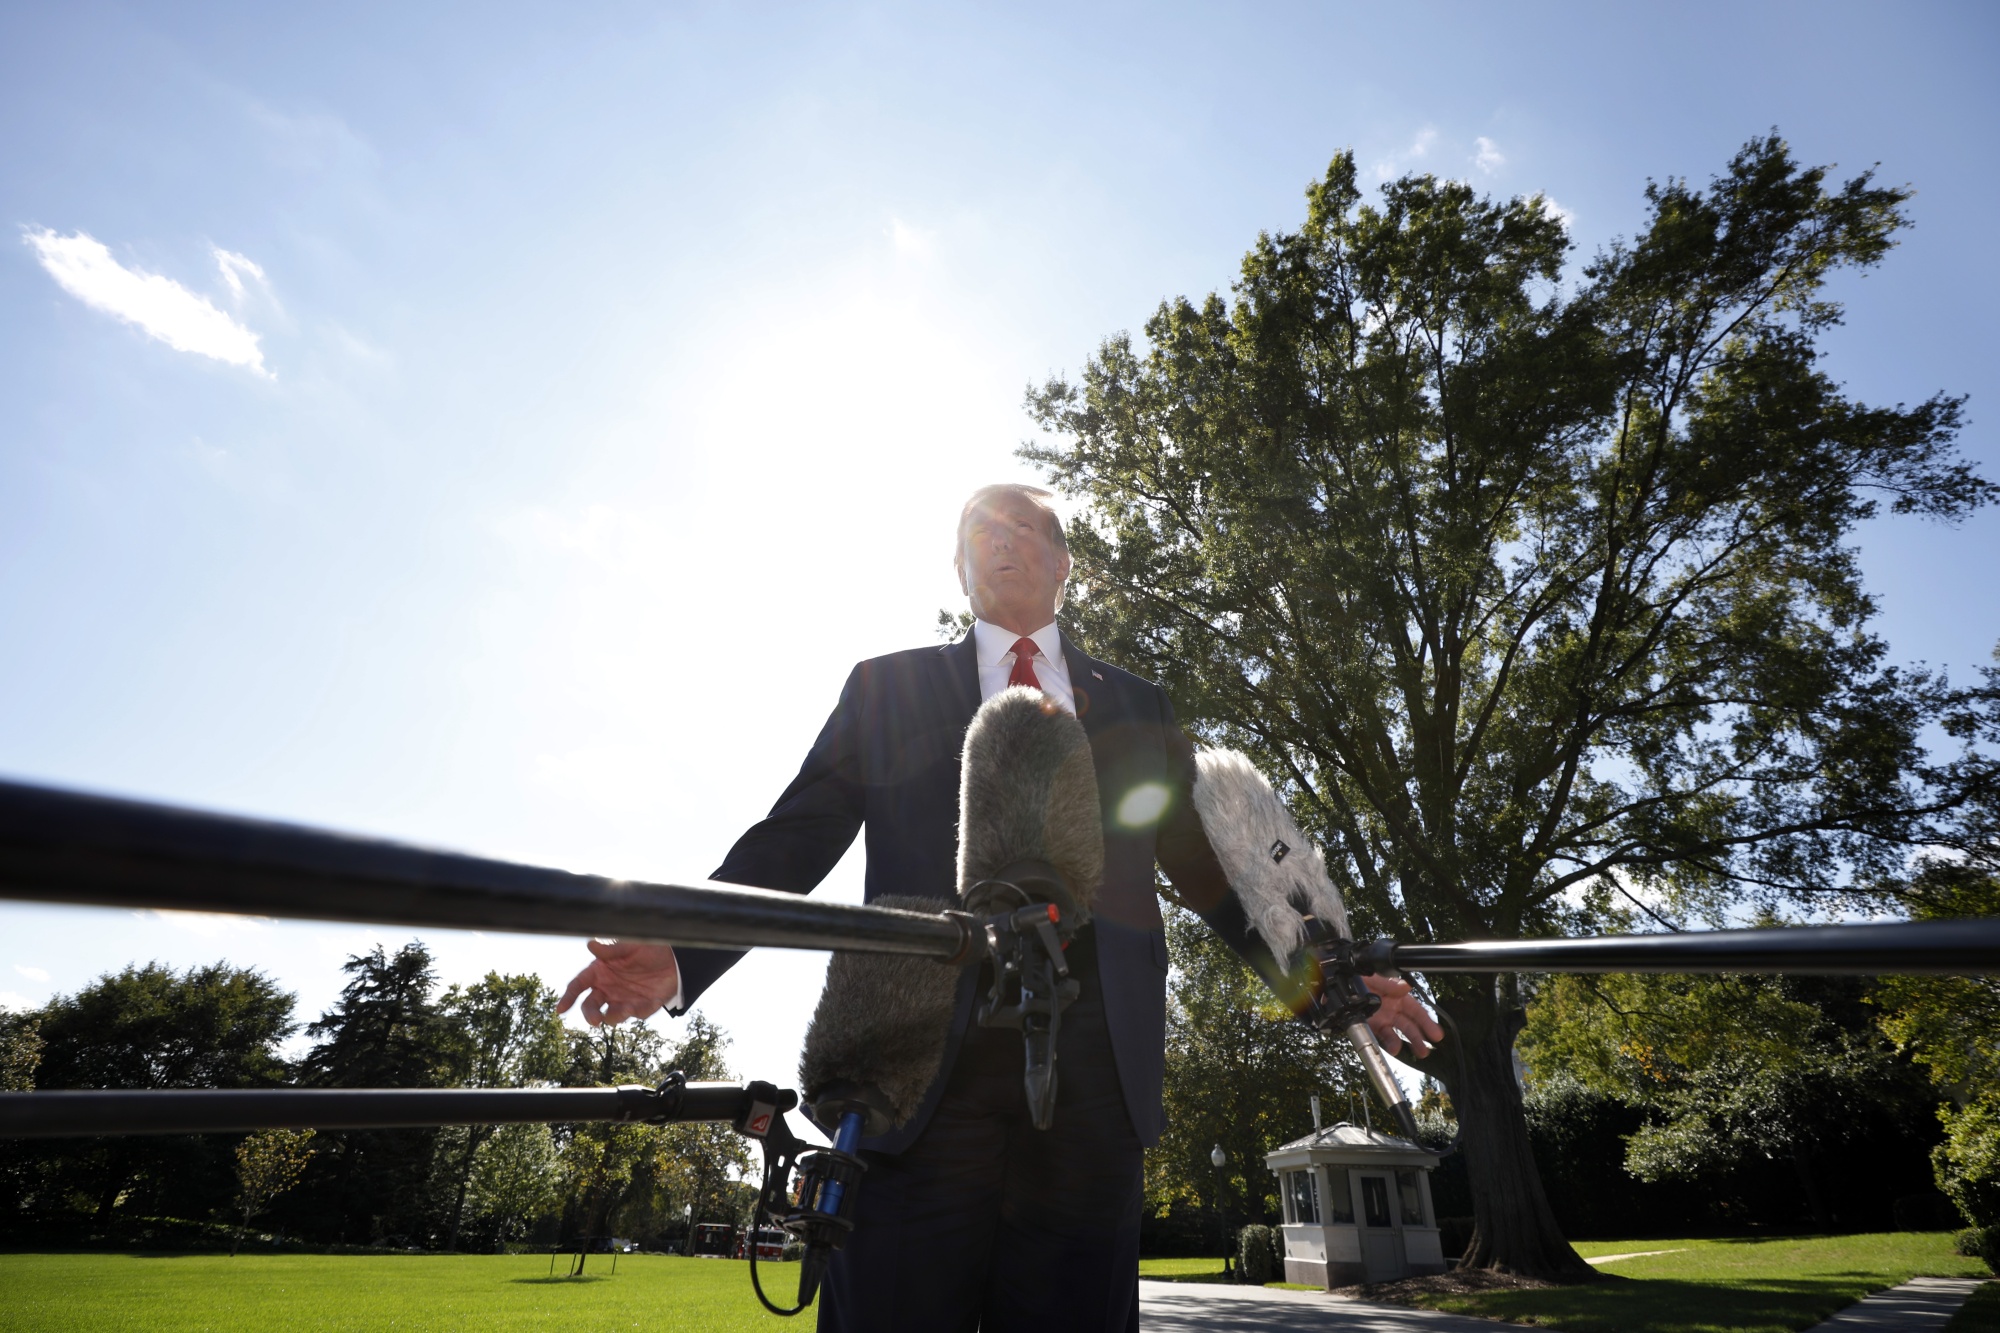 Donald Trump speaks to members of the media on the South Lawn of the White House in Washington, D.C. on Sept. 30.